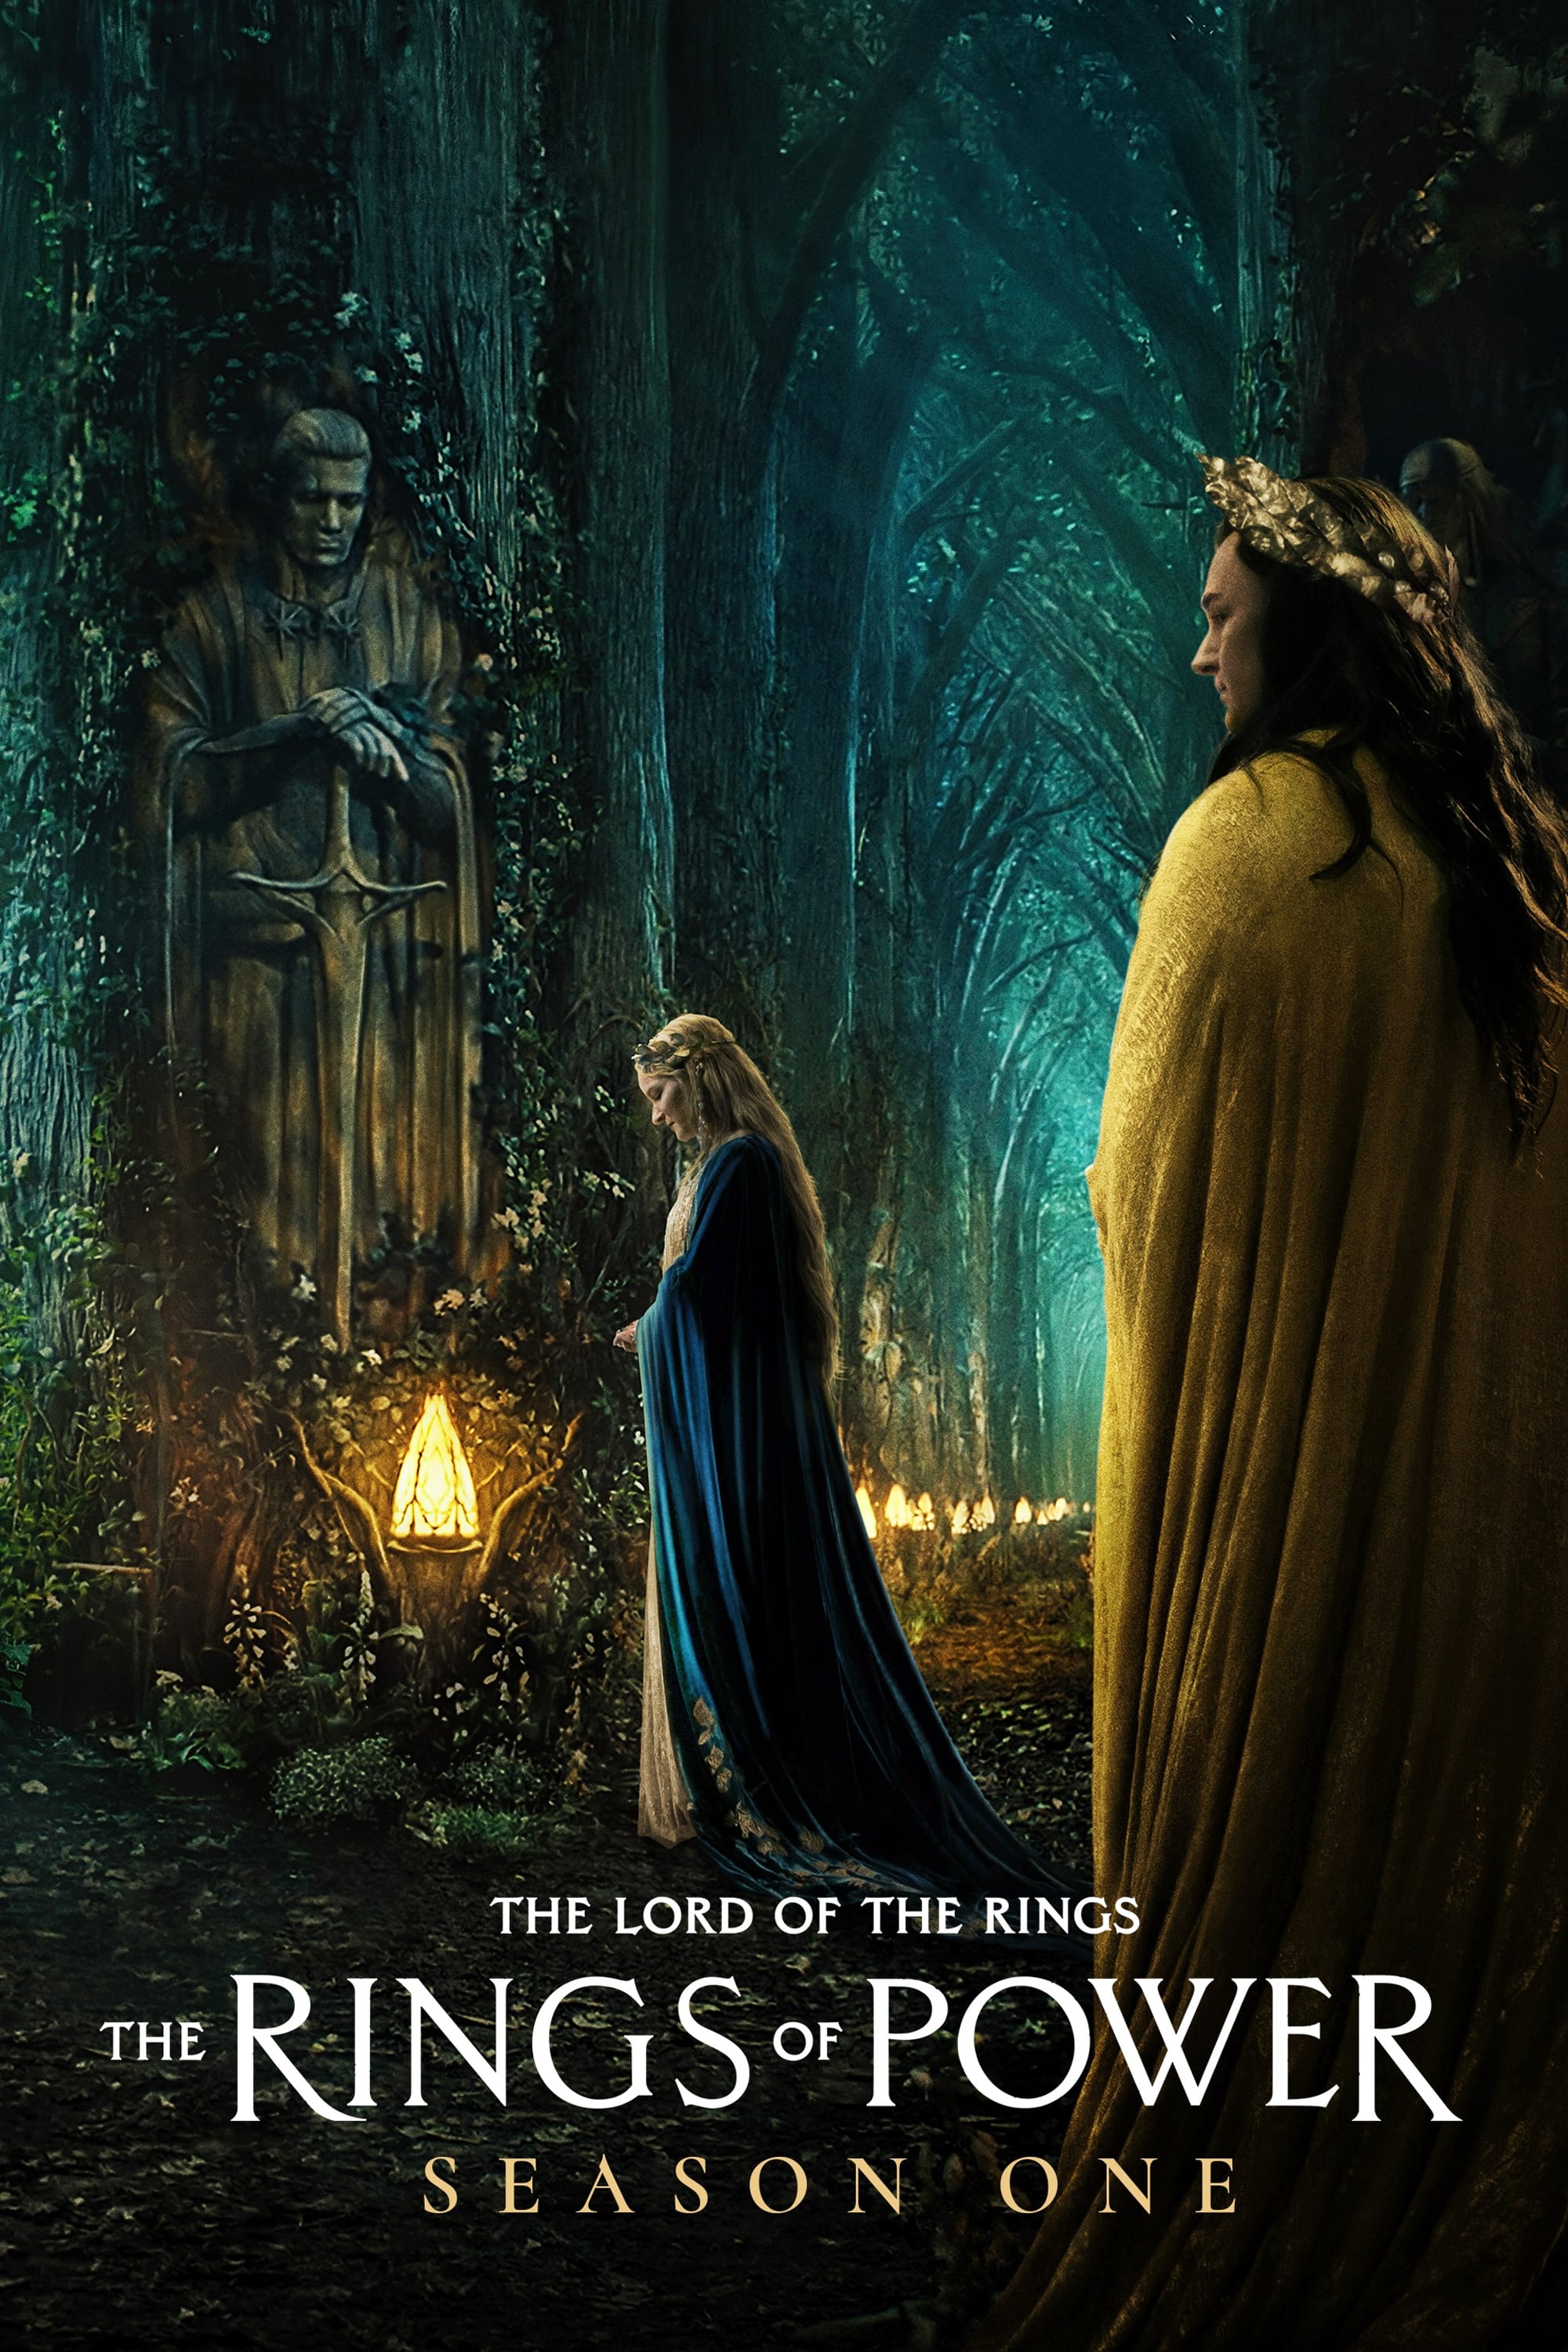 The Lord of the Rings: The Rings of Power : Udûn